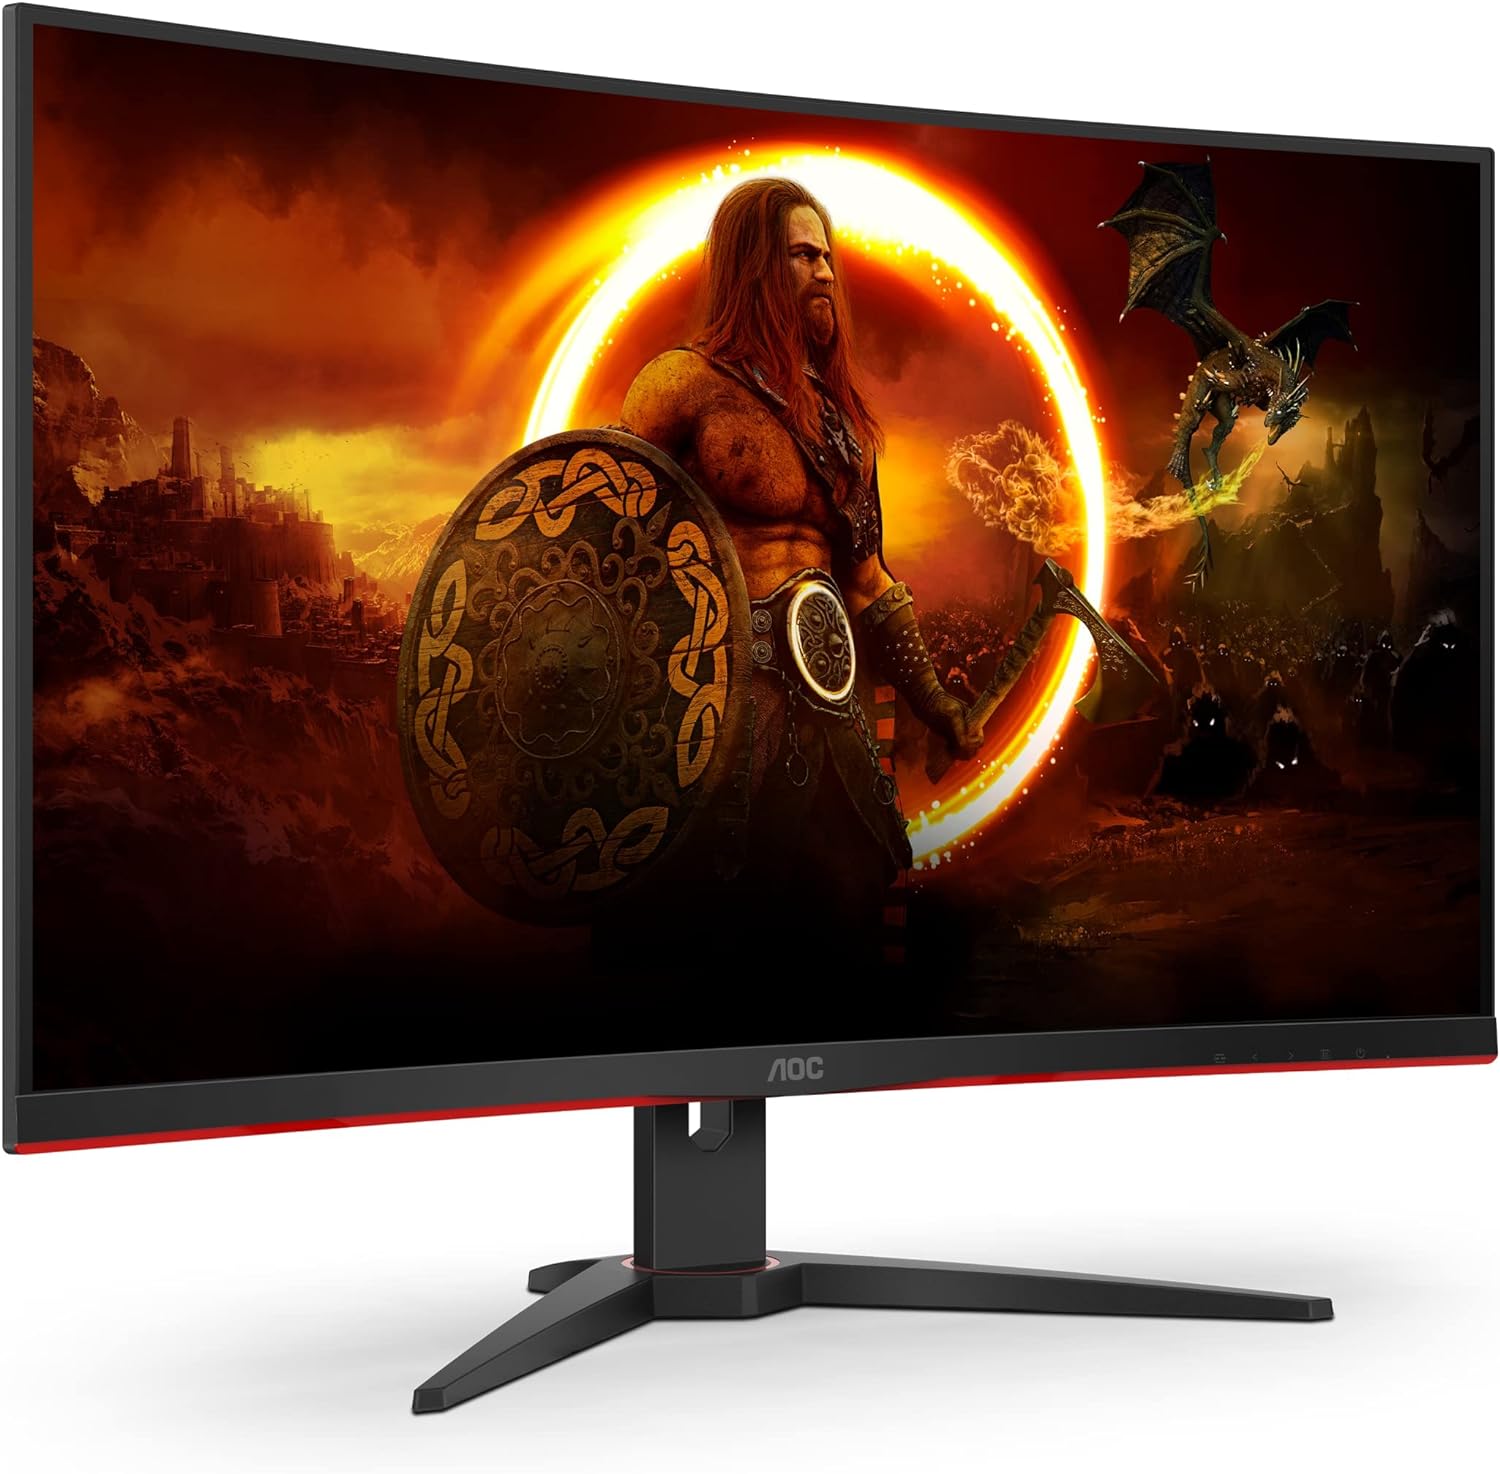 Immersive 32 AOC Gaming Monitor - 1920x1080 Resolution, 1500R Curvature - Gaming Experience 0685417724185